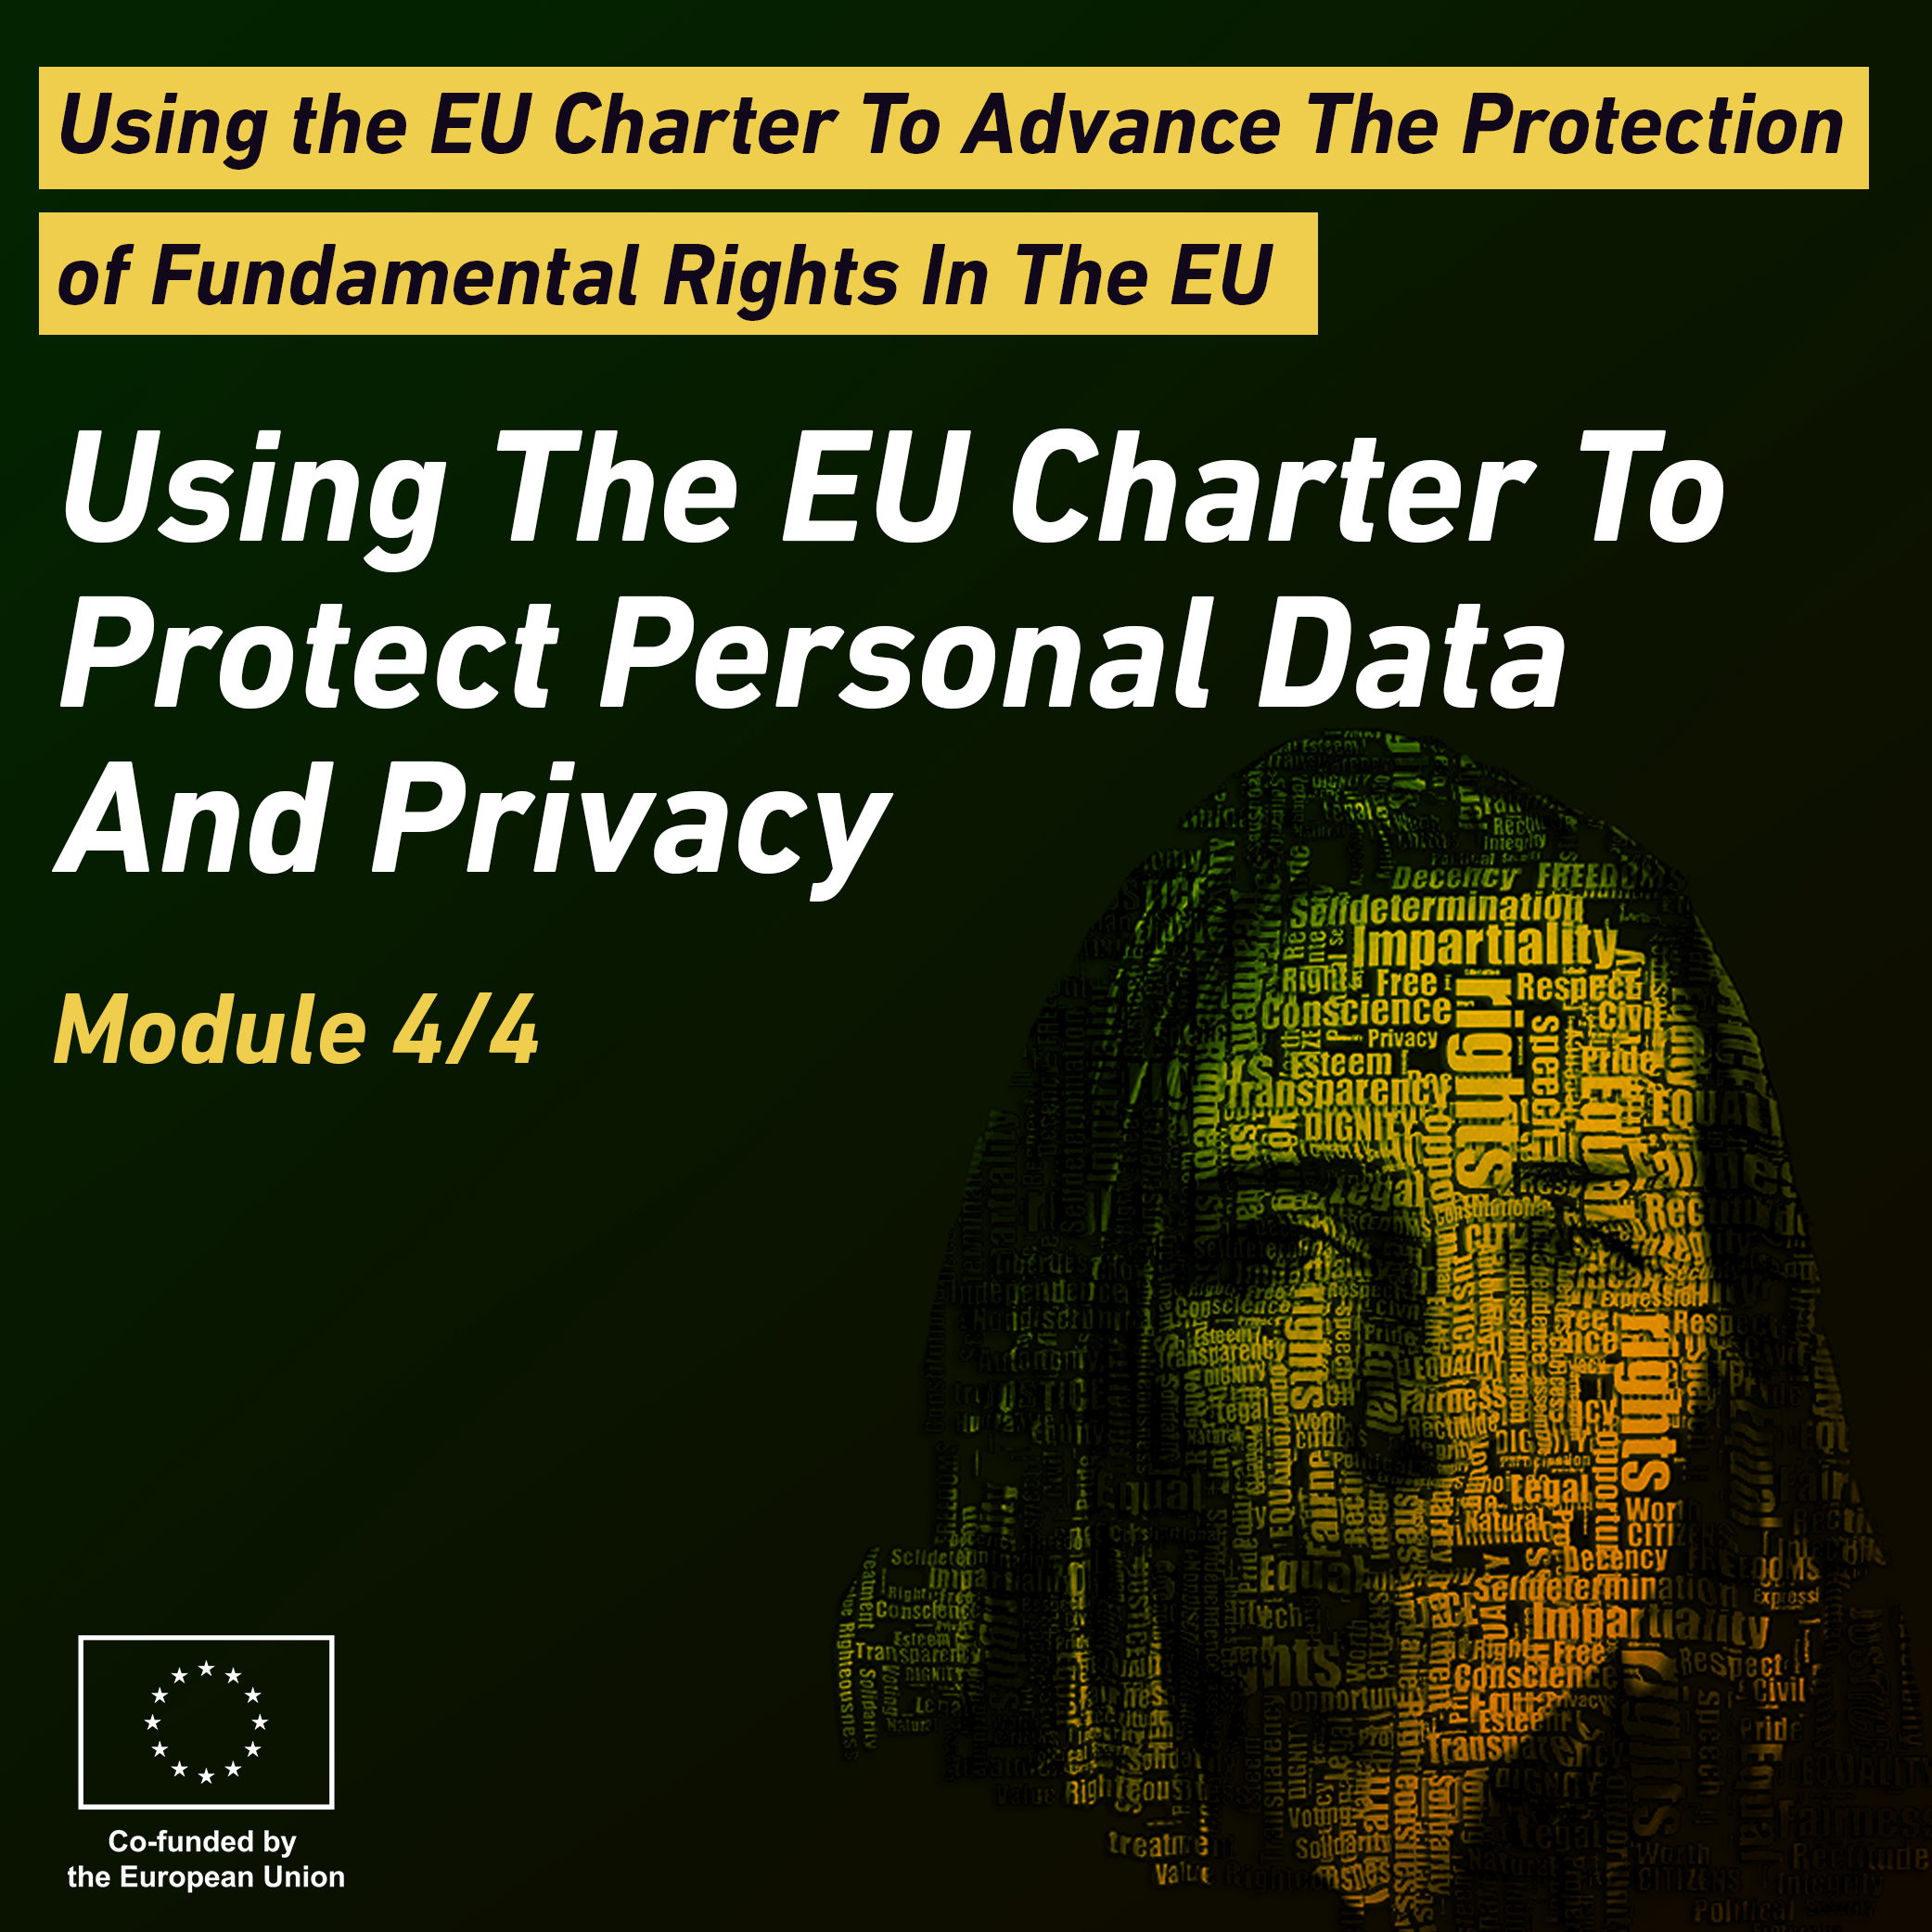 Using the EU Charter to Advance the Protection of Fundamental Rights in the EU - Module 4 LIB012